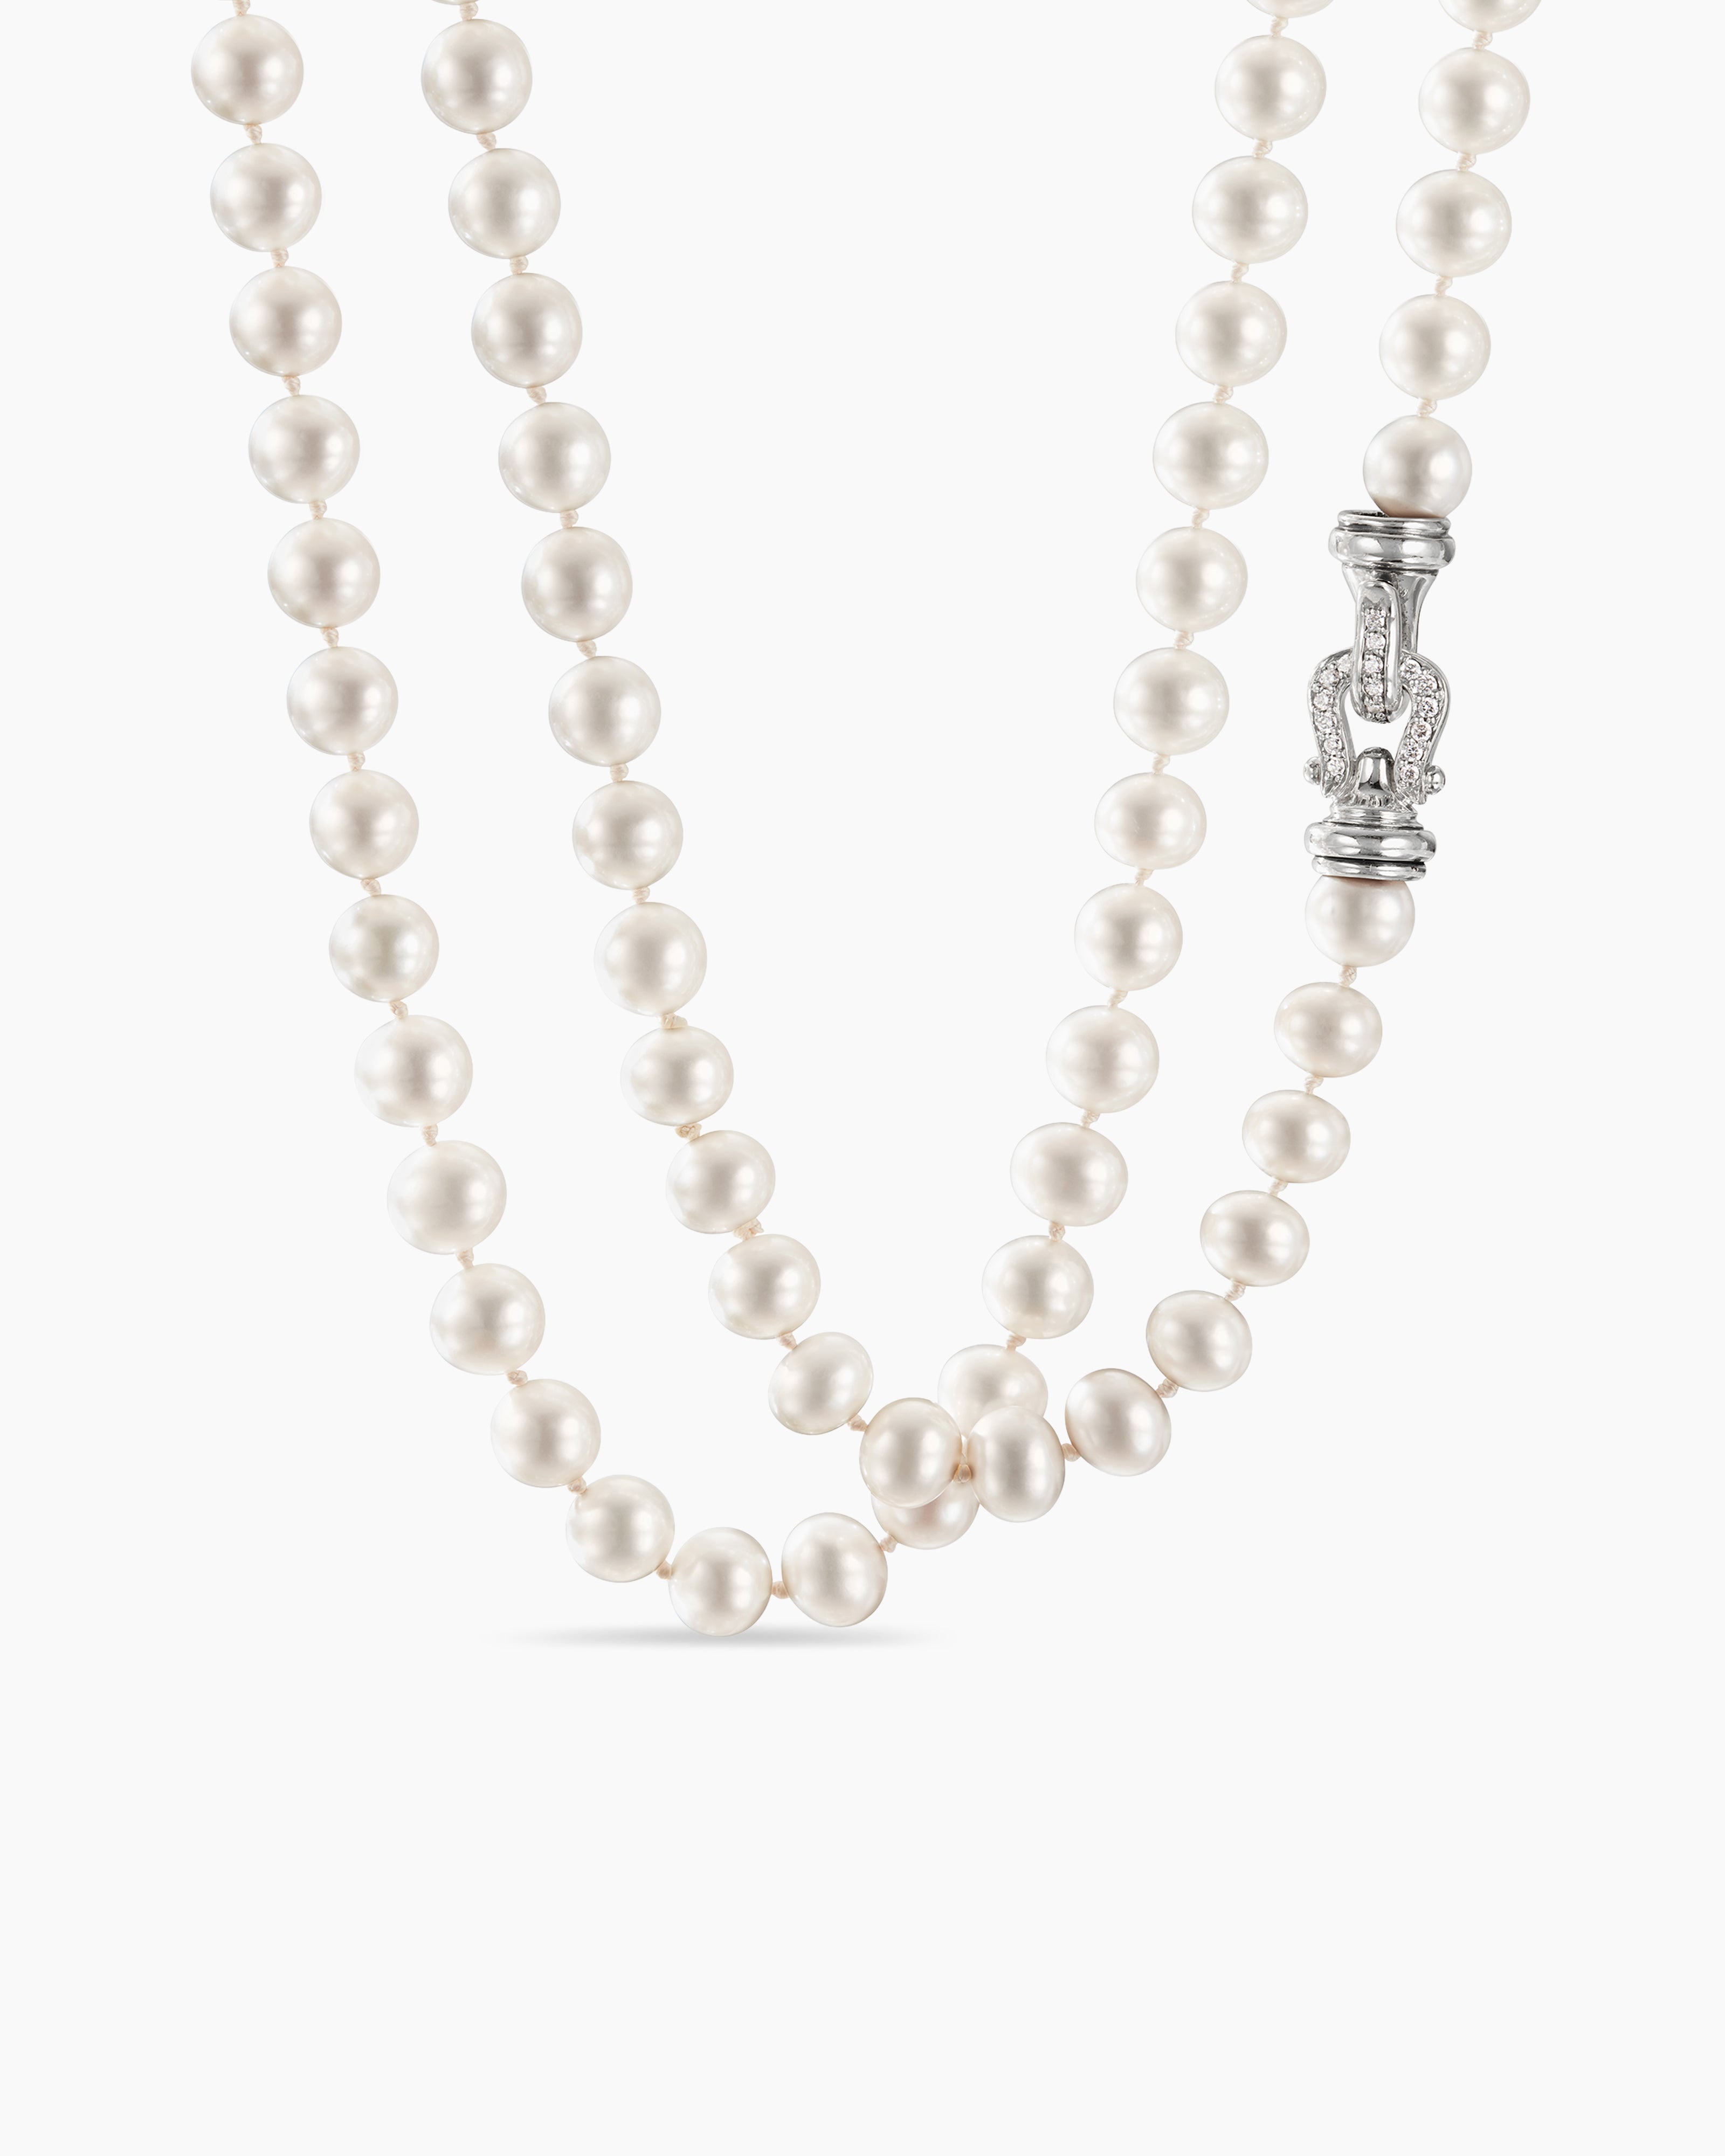 PEARL CROSS NECKLACE – OHTNYC